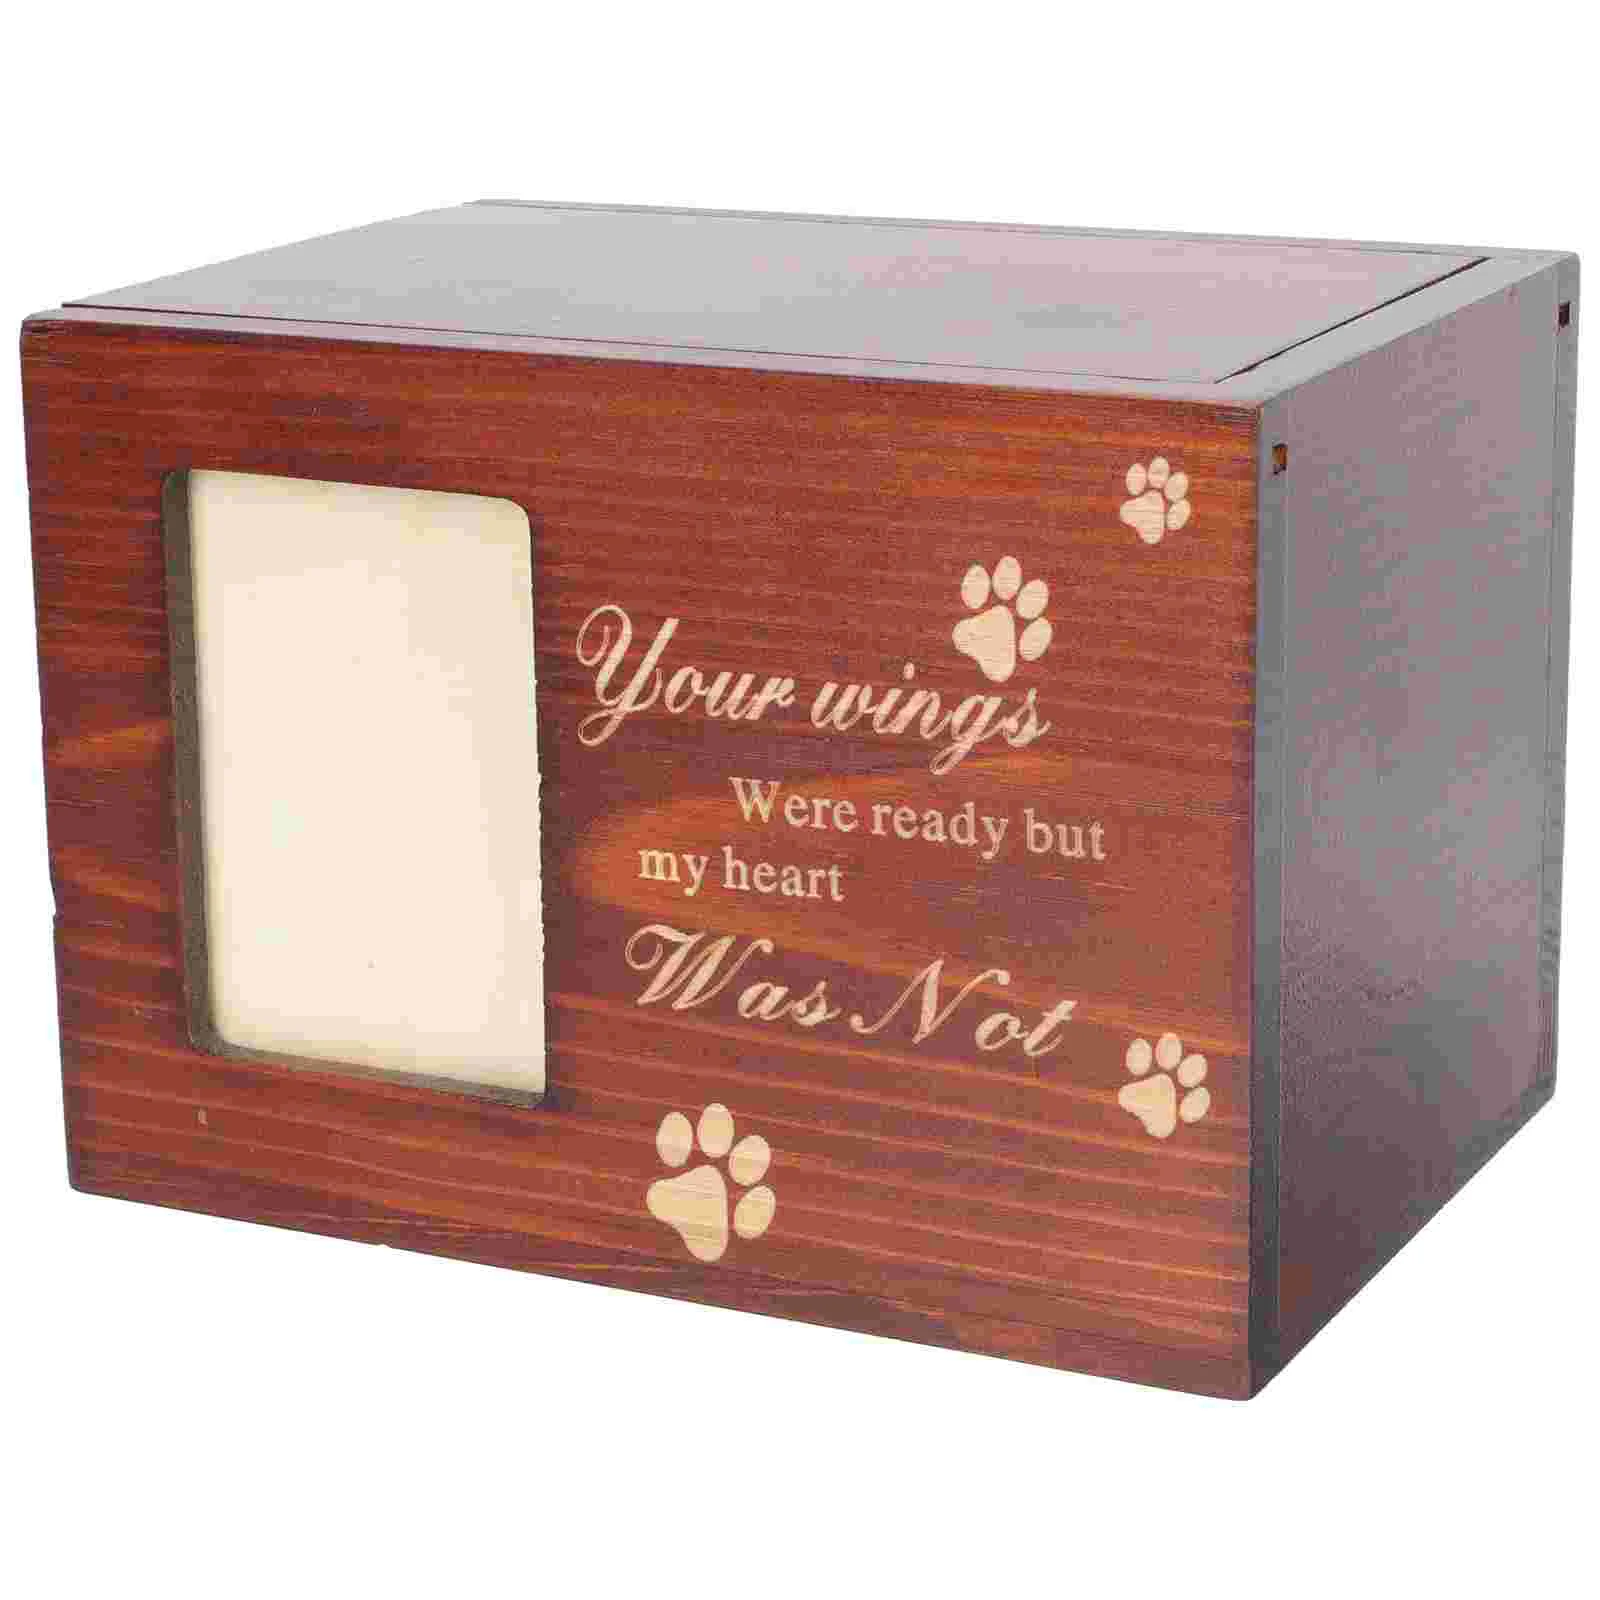 

Cremation Urn Pet Cinerary Casket Wood Memorial Box Ashes Keepsake Small Animals Pet Cats Dogs Funeral Supply